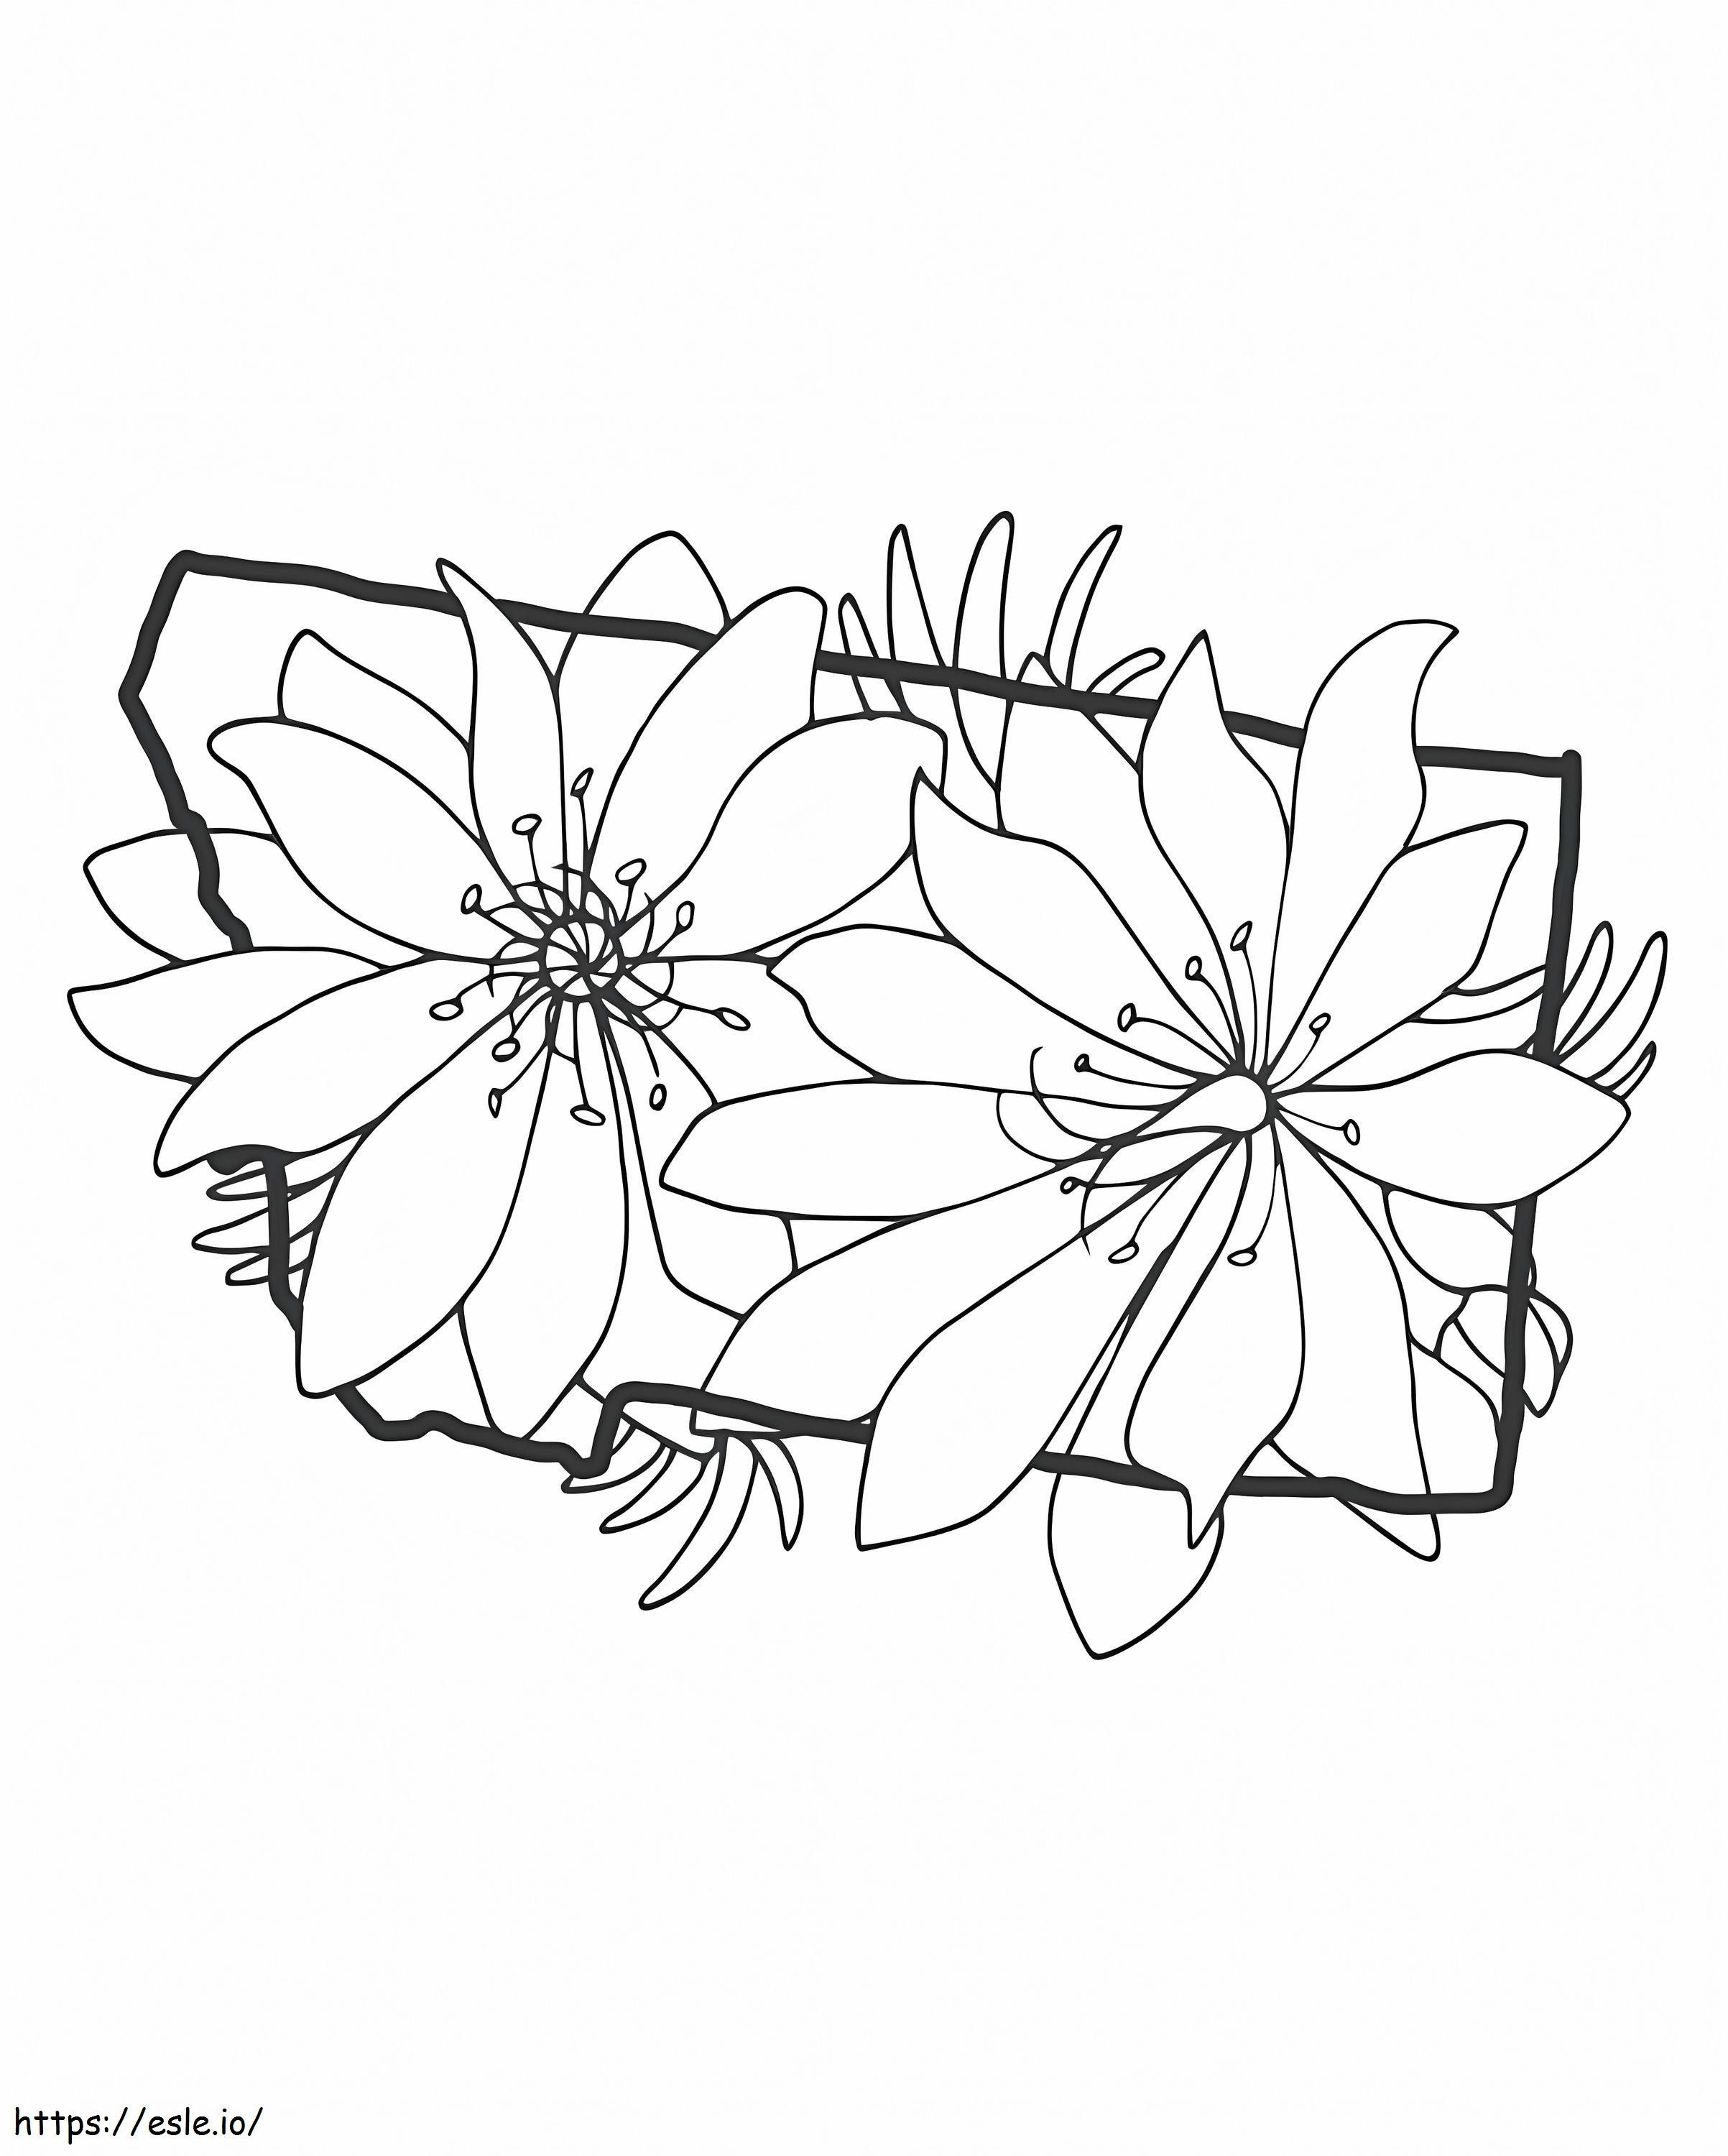 Flowers Aesthetics coloring page